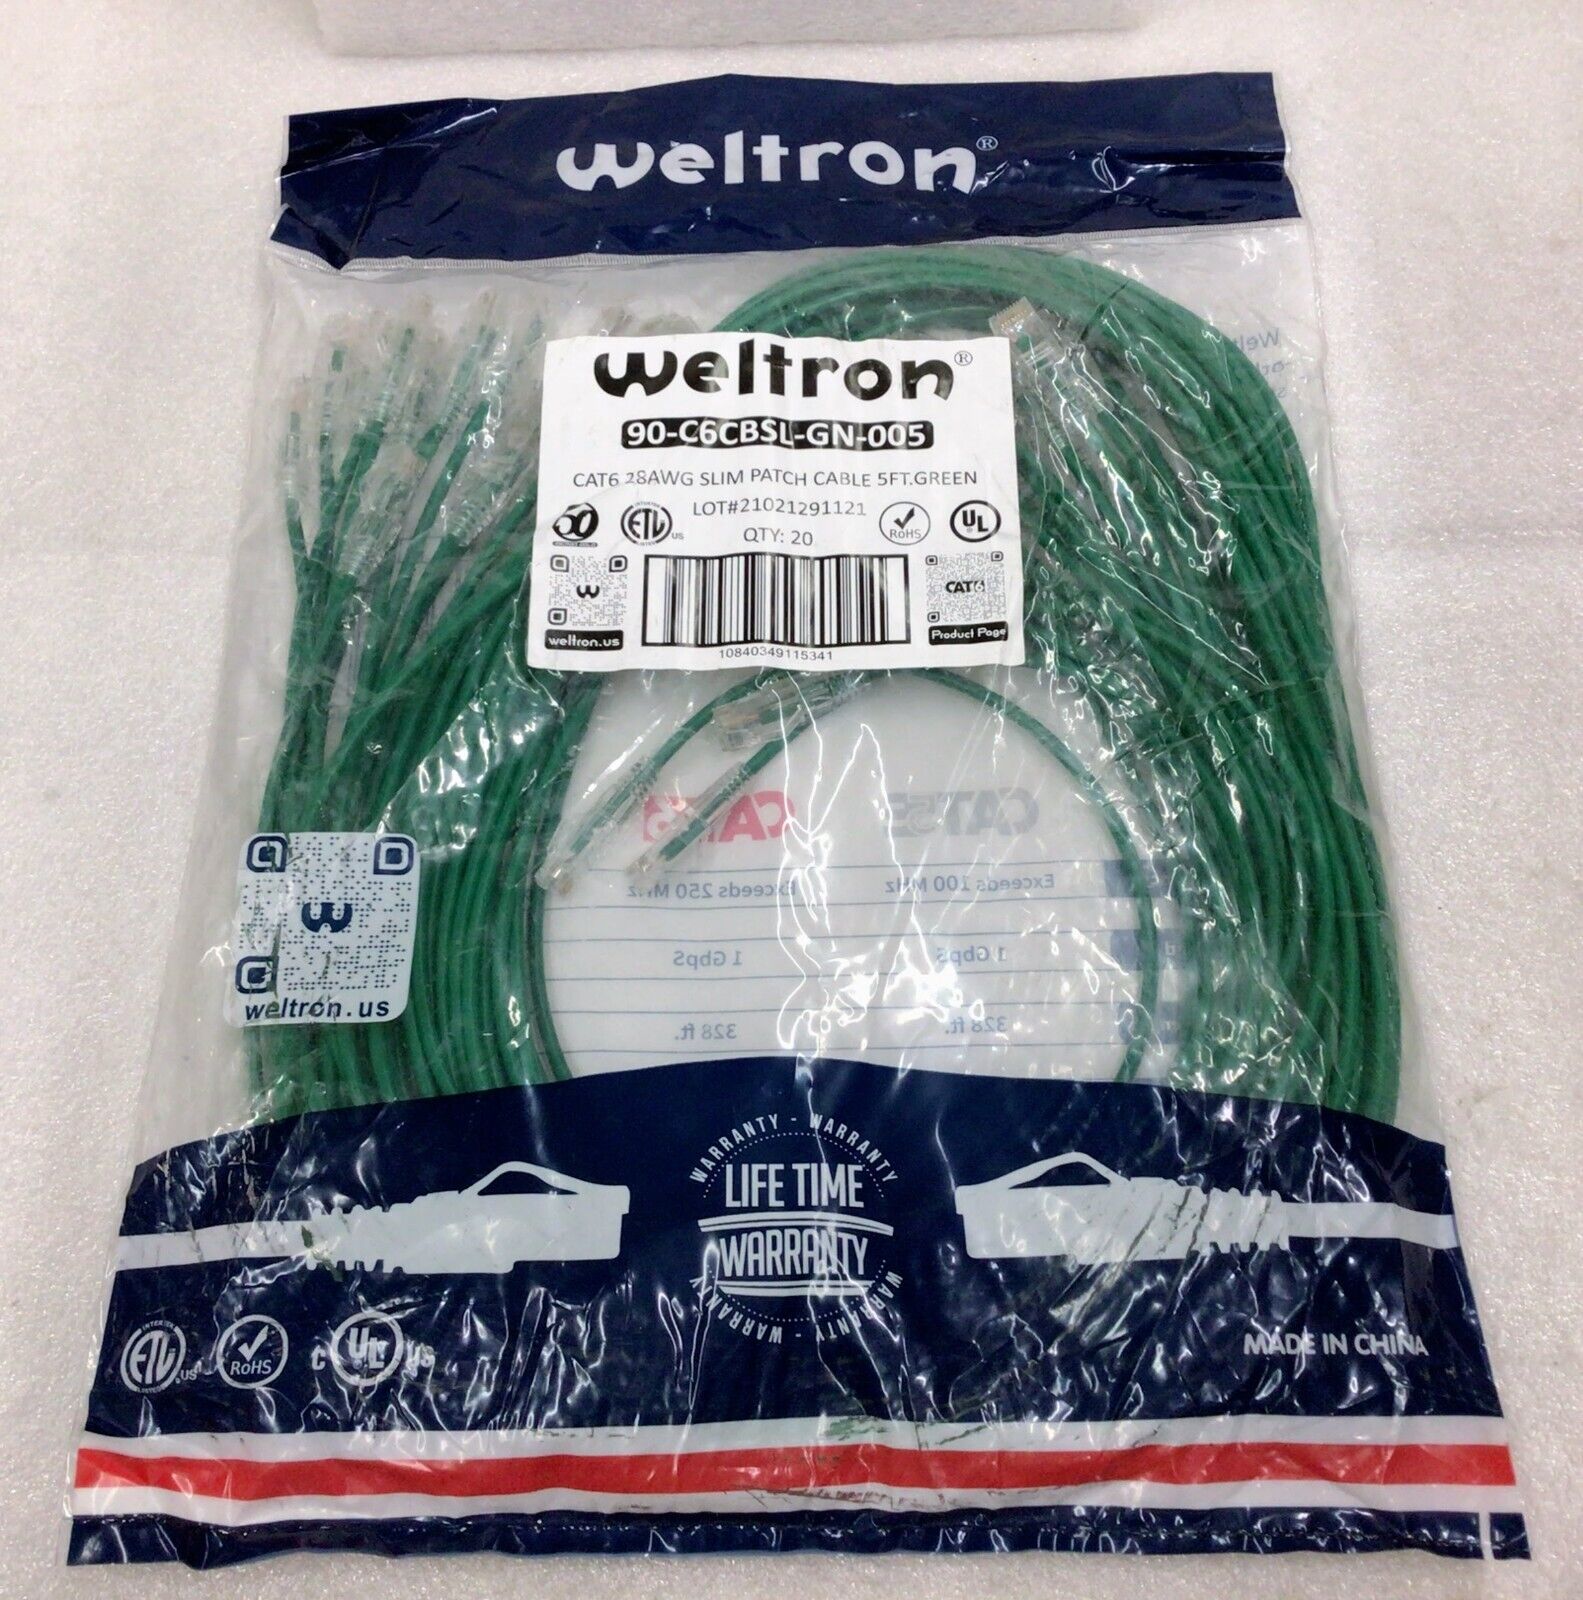 Weltron Slim Cat6 Ethernet Patch Cable, 90-C6CBSL-GN-005, Green- 5ft • 20 Pack